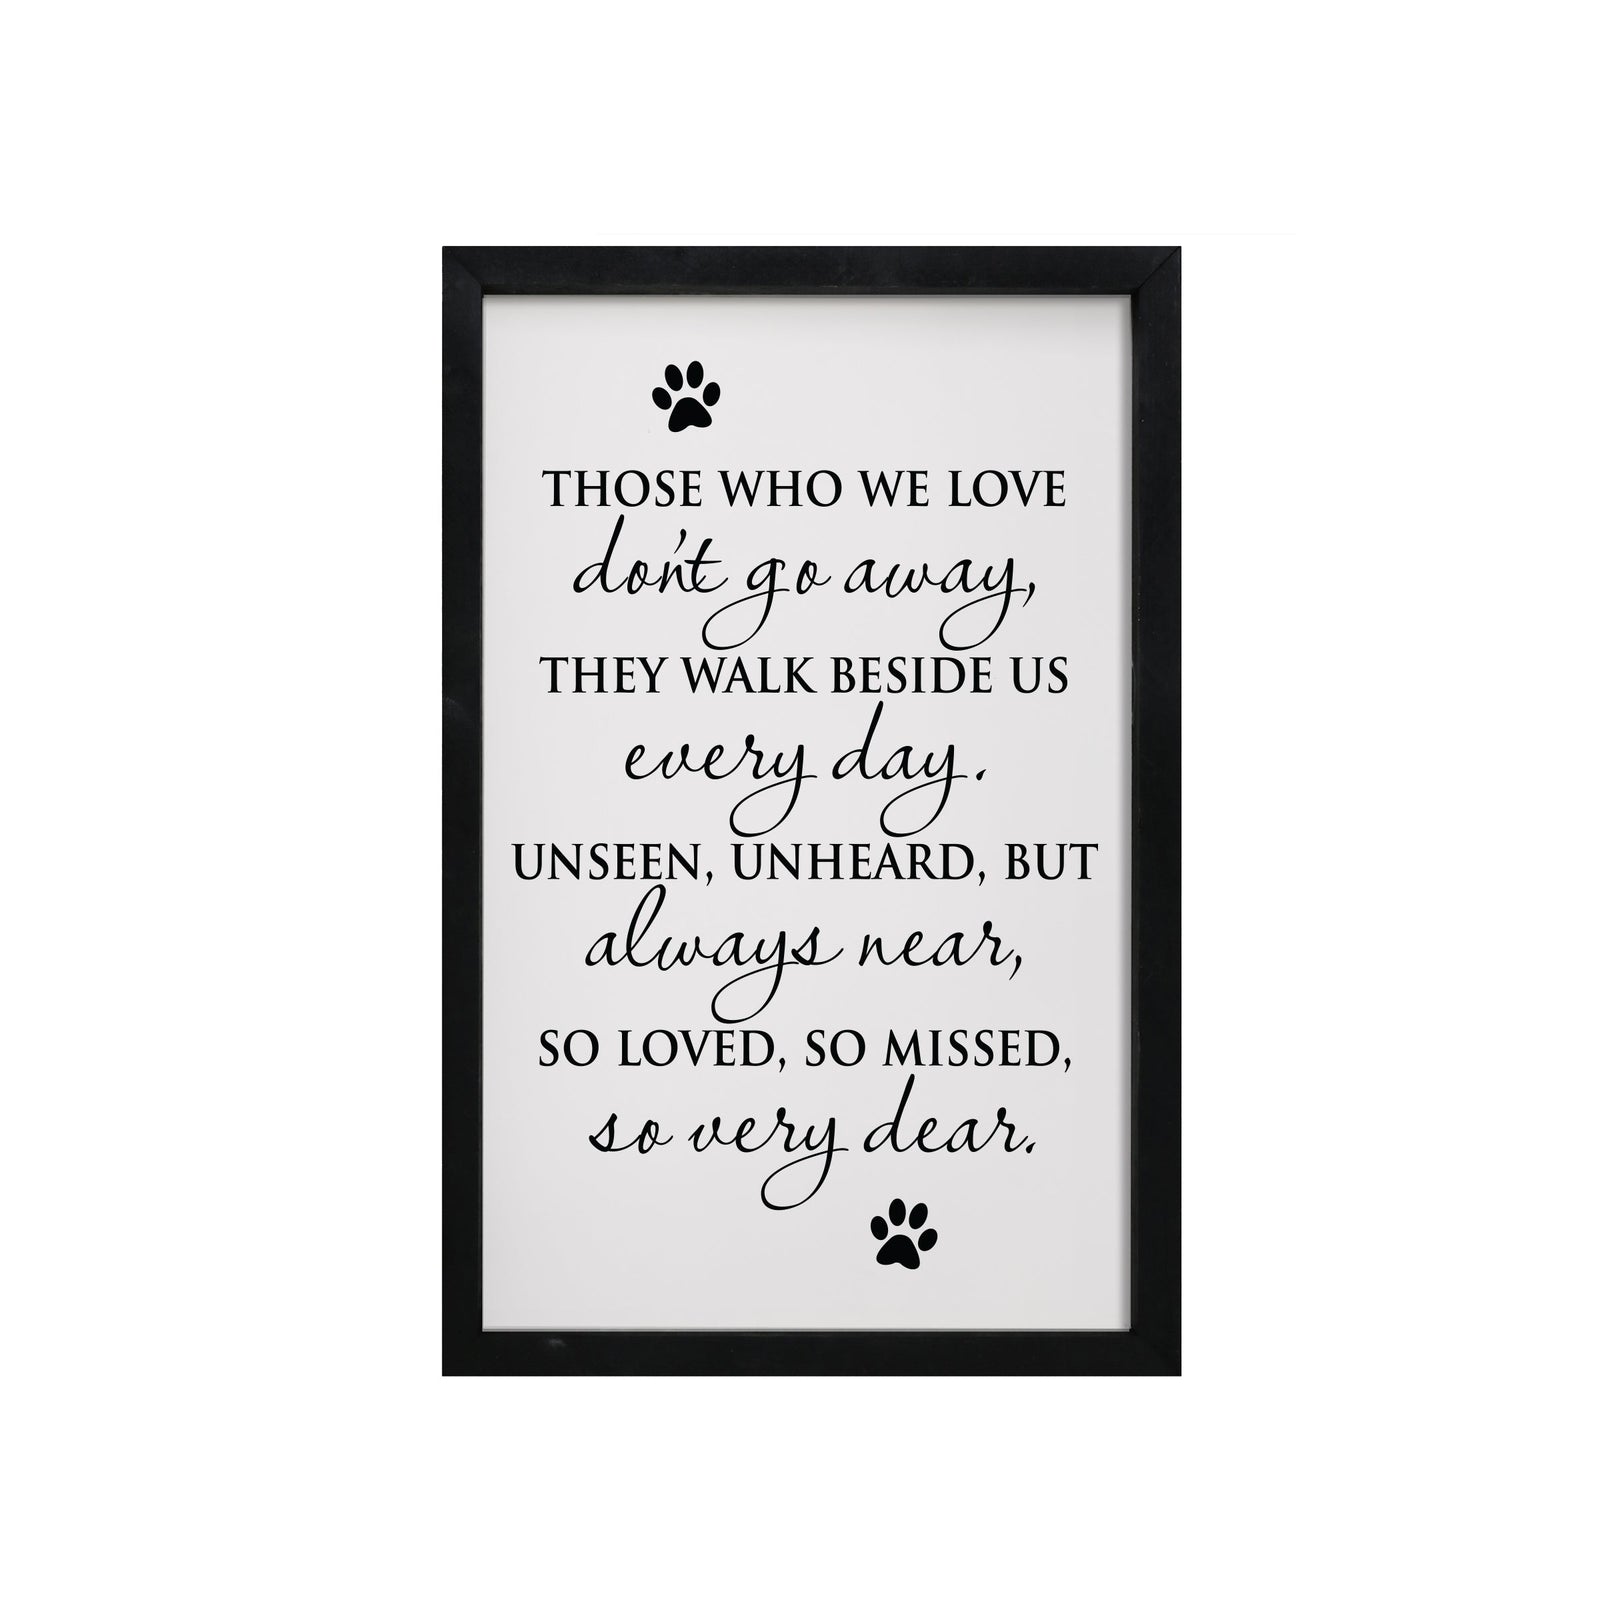 10x7 Black Framed Pet Memorial Shadow Box with phrase "Those Who We Love Don't Go Away"